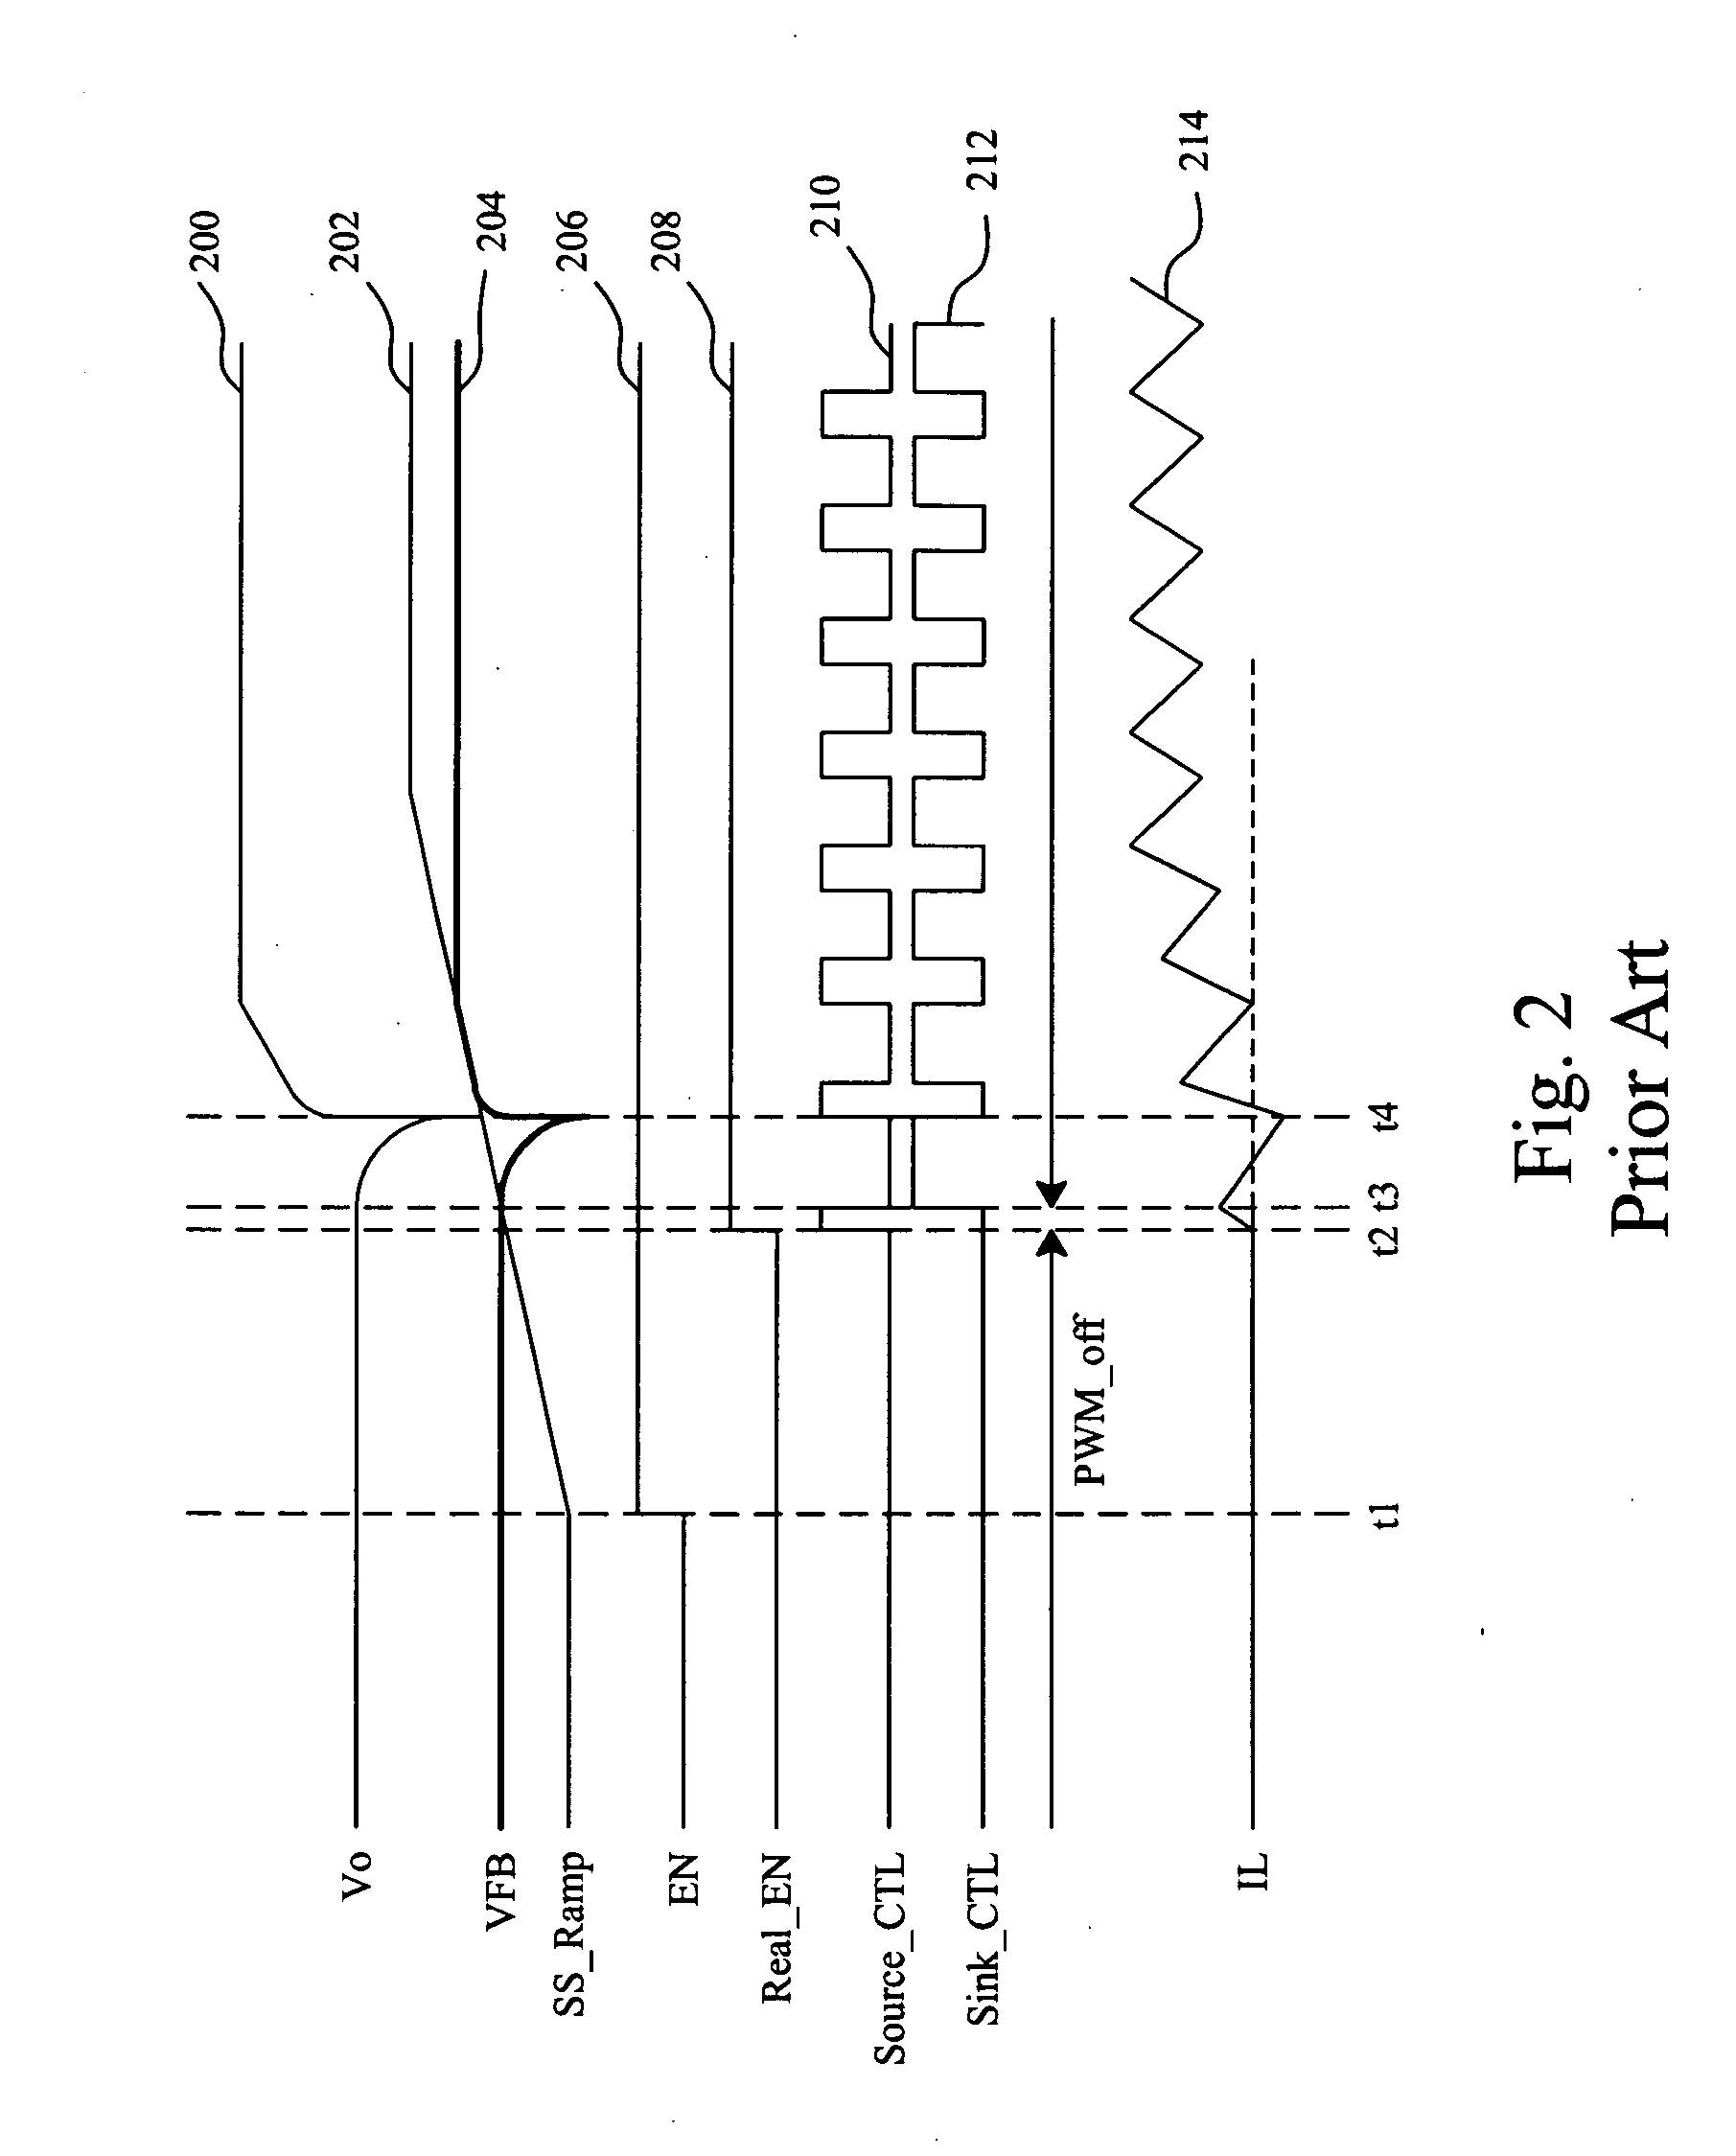 Circuit and method for soft start of a switching regulator from a residual voltage